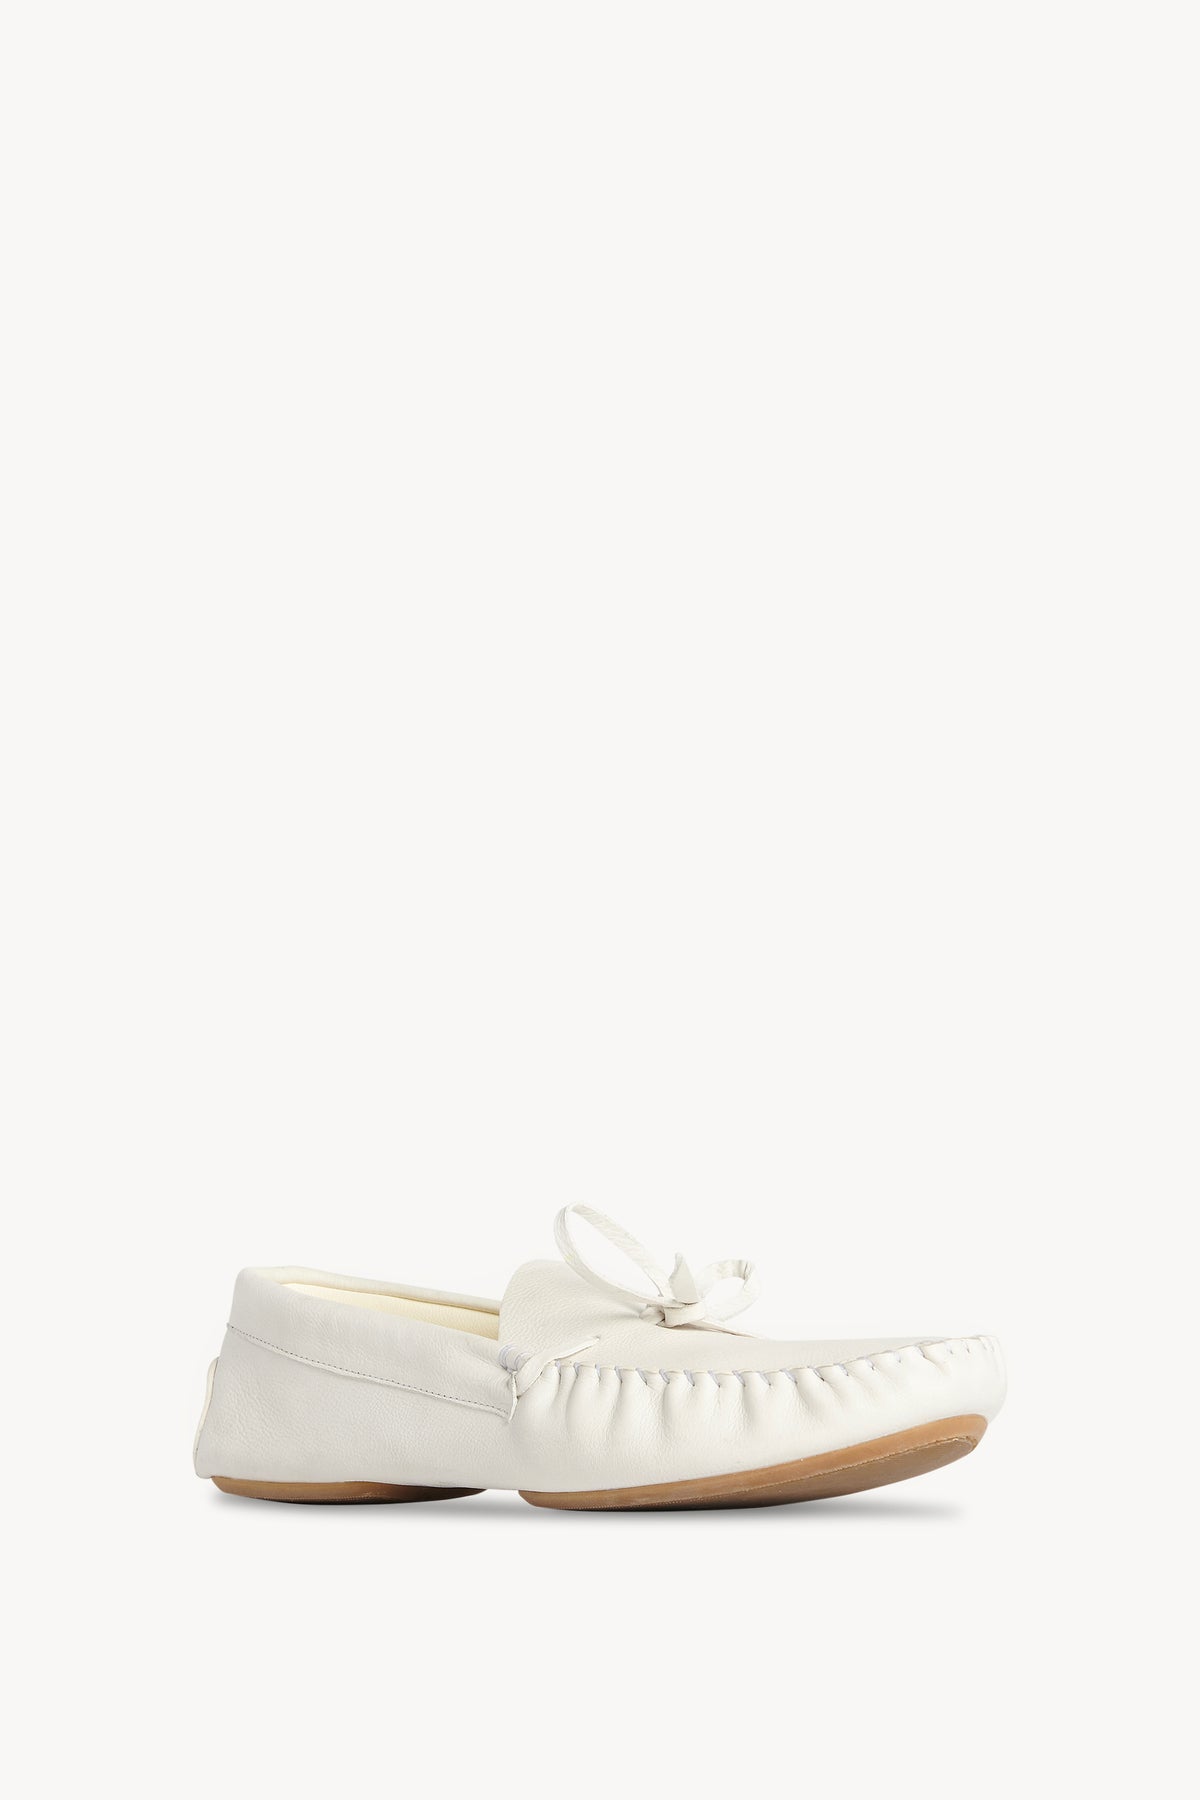 Lucca Moccasin in Leather